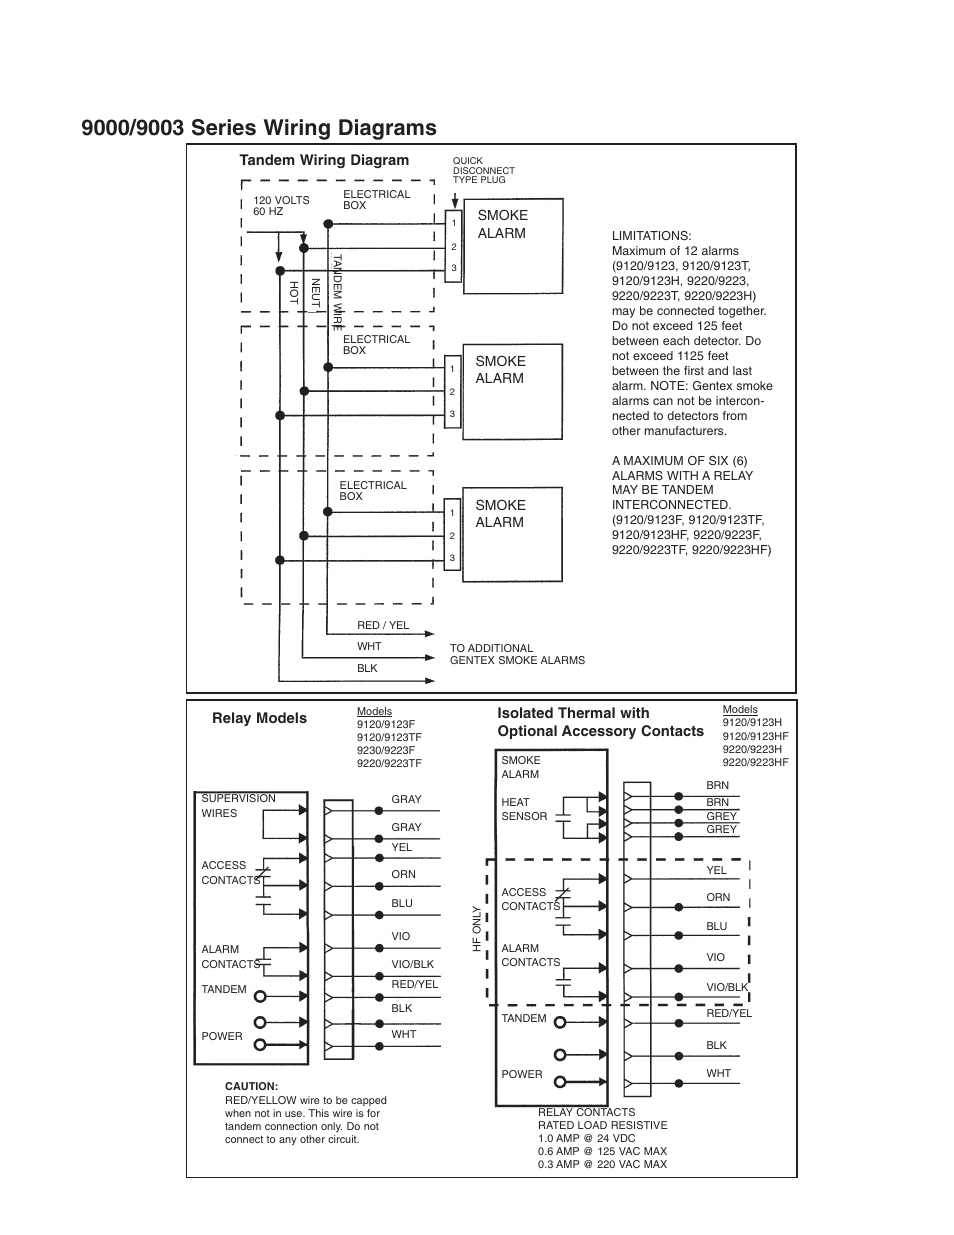 Smoke alarm, Tandem wiring diagram relay models, Isolated thermal with optional accessory contacts | Silent Call Gentex 9120FT User Manual | Page 3 / 4